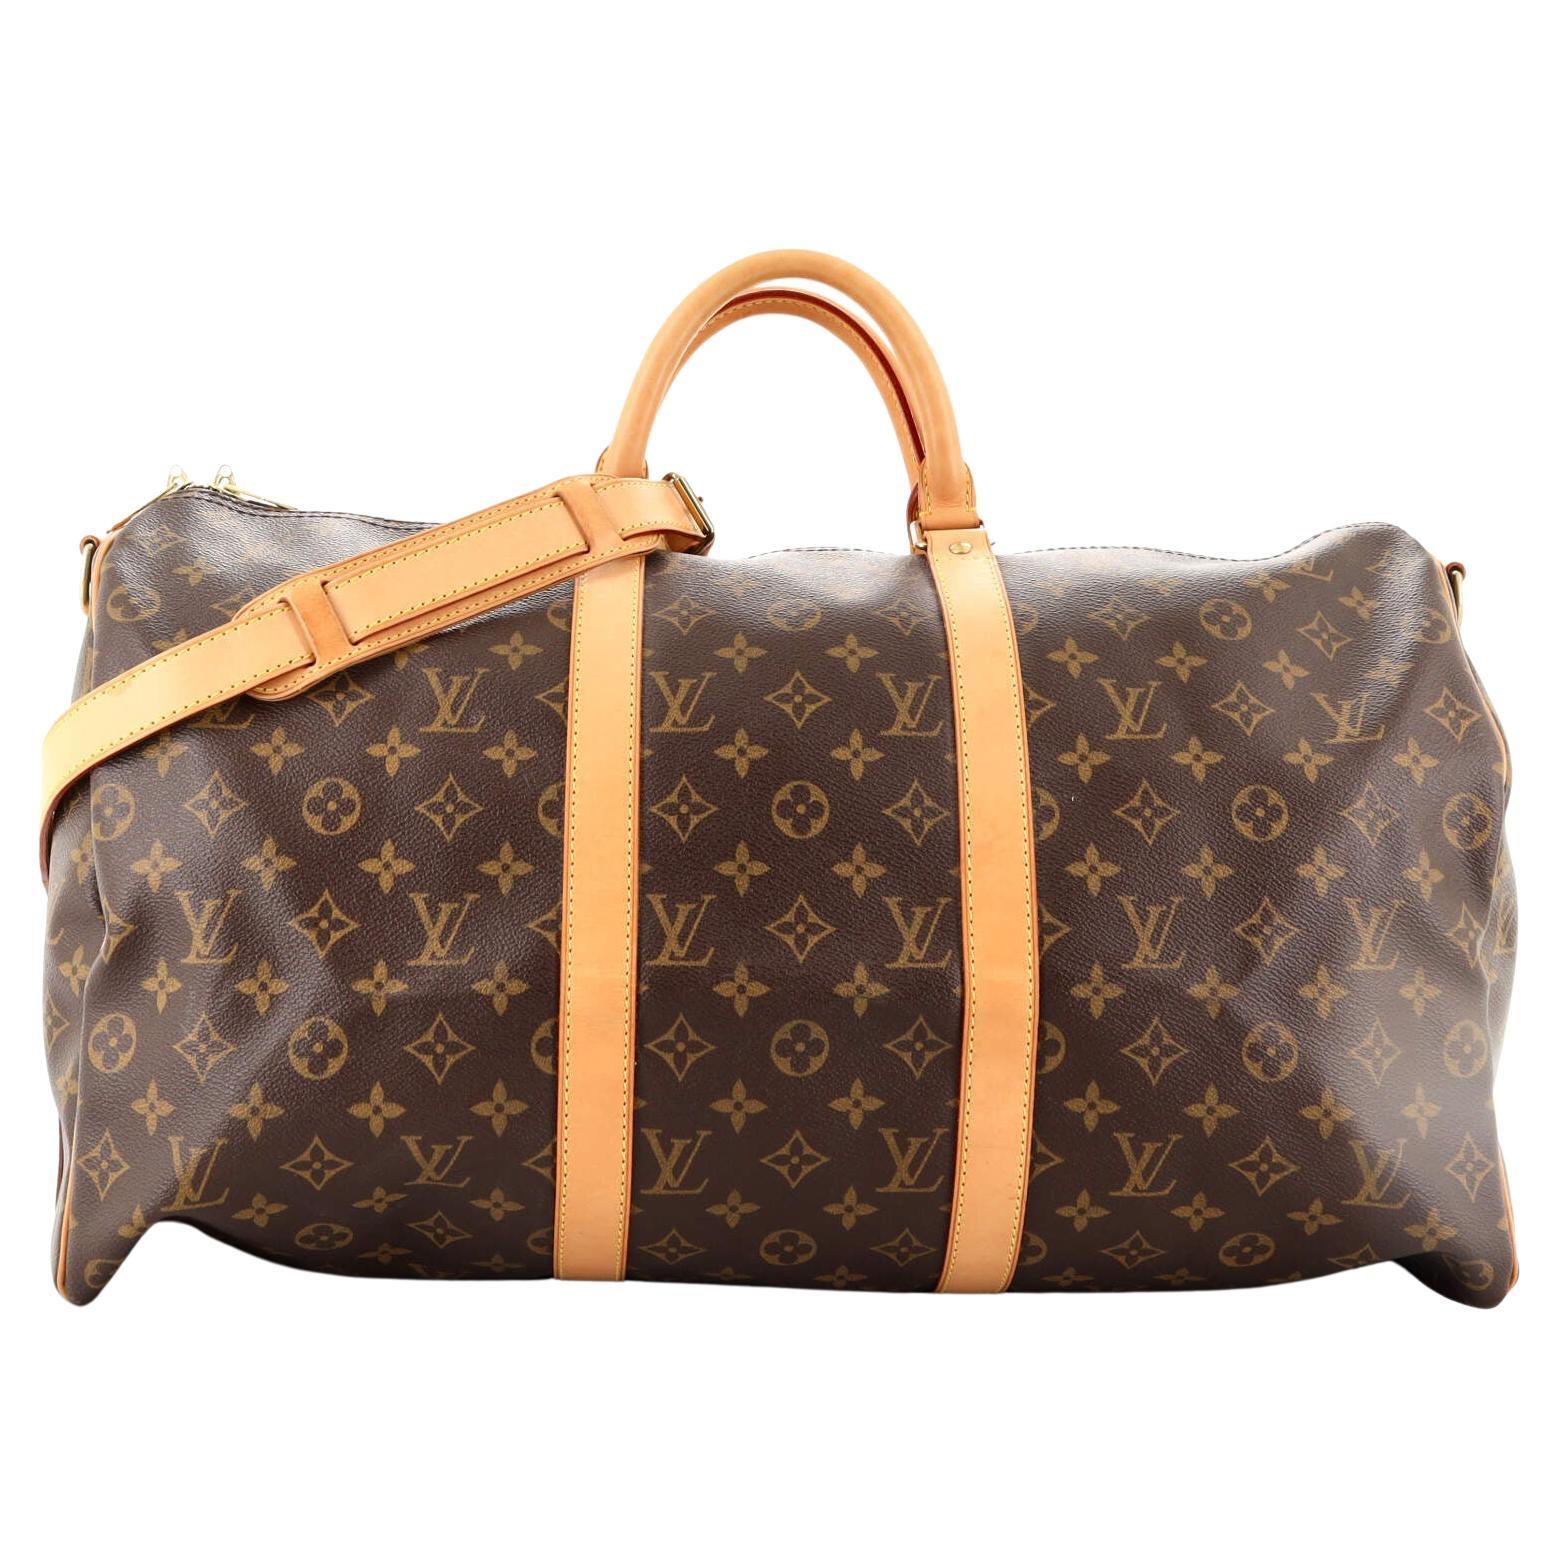 Louis Vuitton Keepall 55 strap travel bag customized Popeye by PatBo!